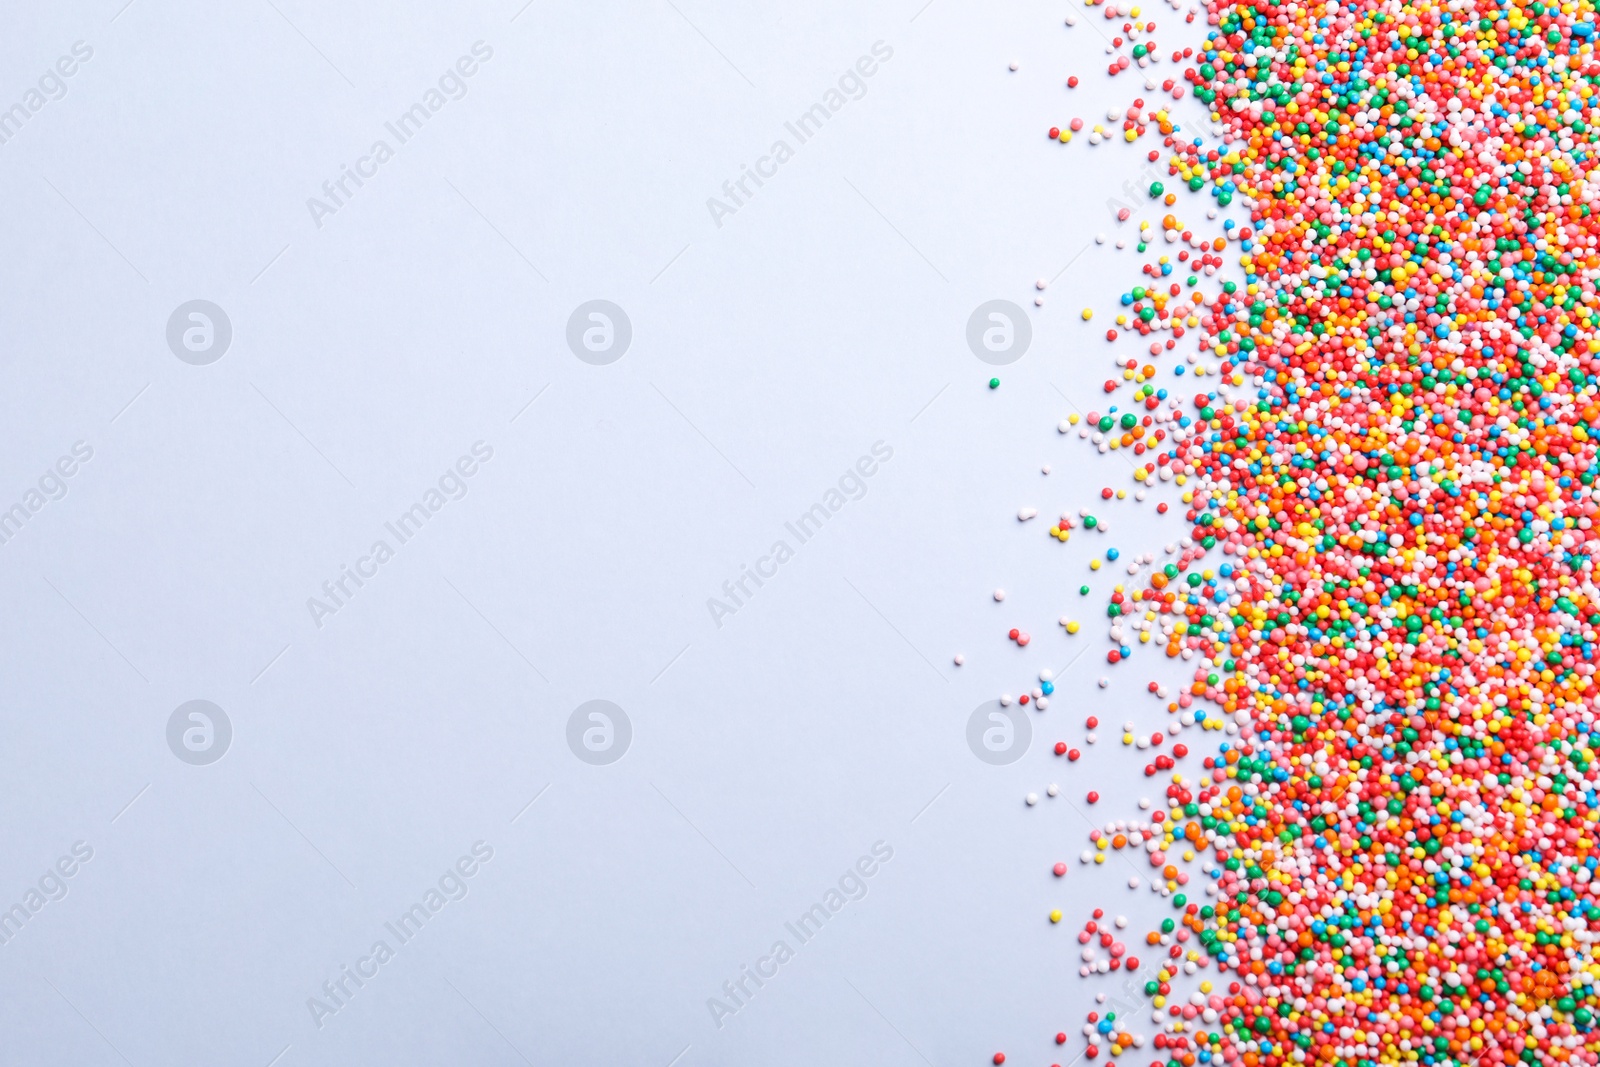 Photo of Colorful sprinkles on light grey background, flat lay with space for text. Confectionery decor